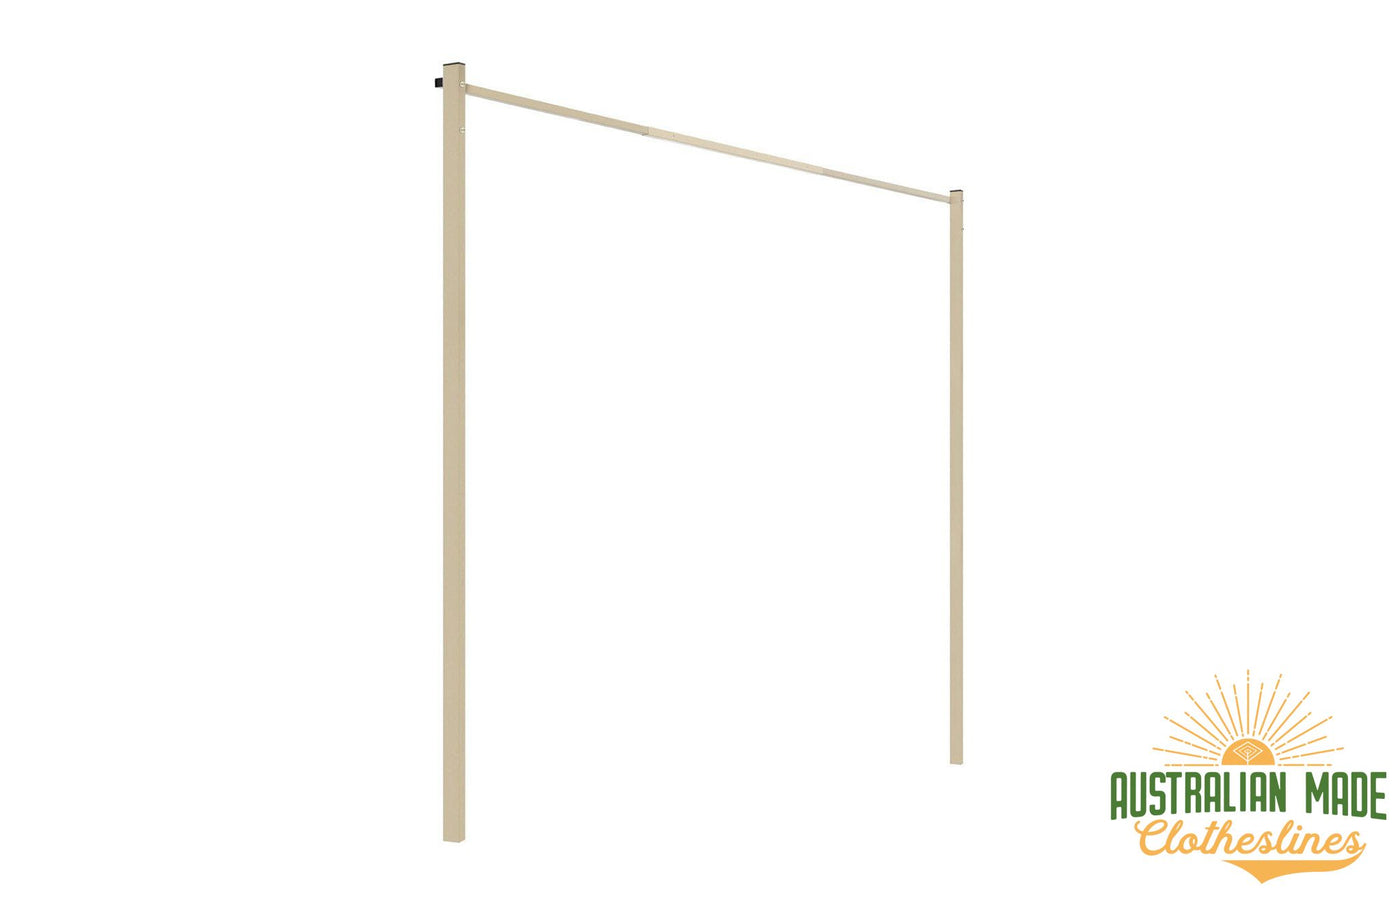 Austral 3.3m Ground Mount Kit - Classic Cream Standard Ground Mount Kit for Soil or Grass Mounting - Australian Made Clotheslines